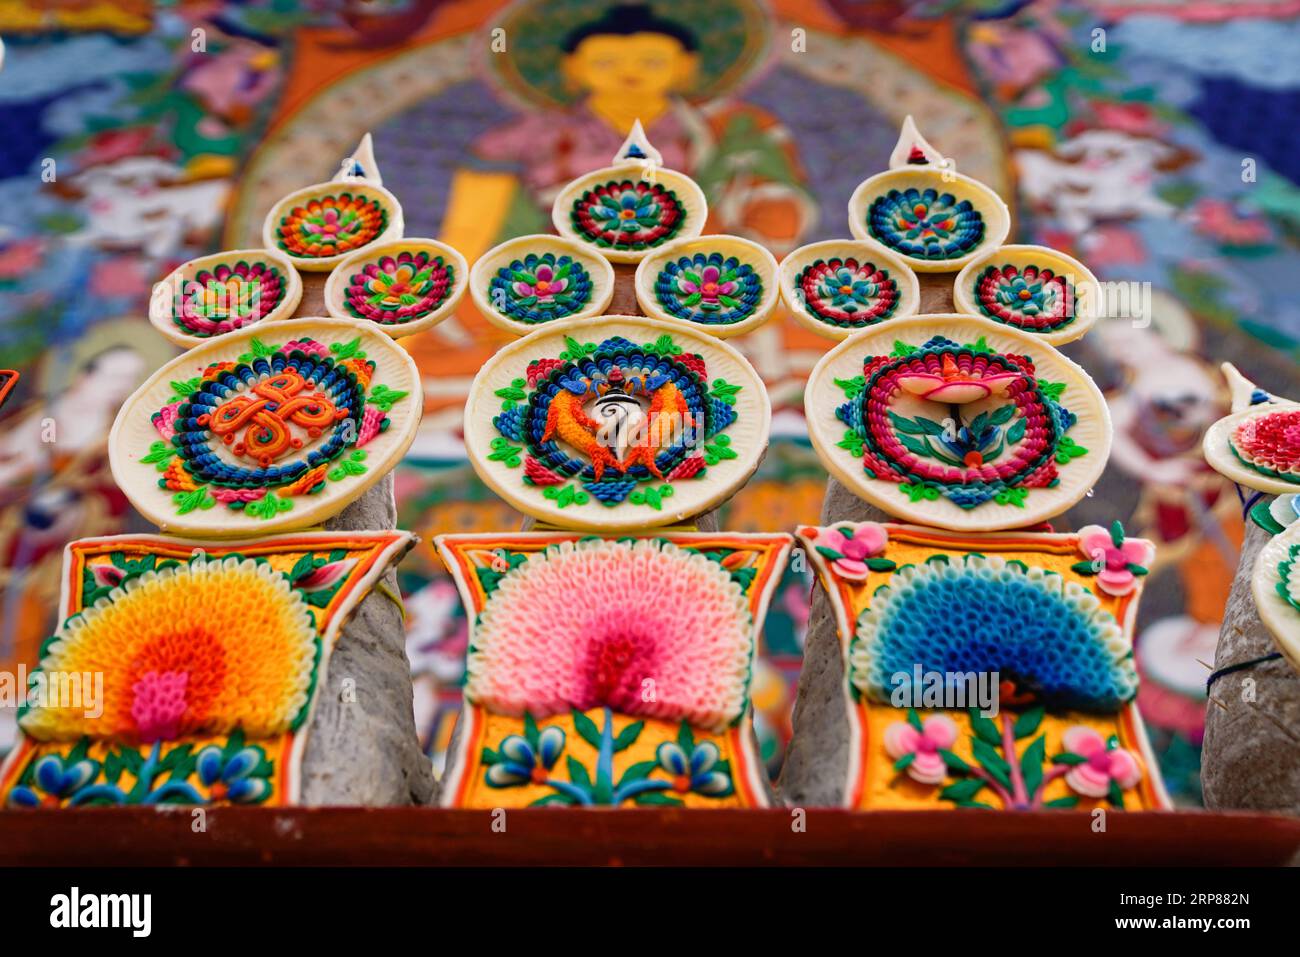 (190221) -- LHASA, Feb. 21, 2019 (Xinhua) -- Butter sculptures are displayed during a Cham dance ritual at the Qoide Monastery in Gonggar County of Shannan Prefecture, southwest China s Tibet Autonomous Region, Feb. 19, 2019. Dressed in colorful costumes, lamas danced to pounding drums at the Qoide Monastery during the Tibetan New Year celebrations. The Cham dance is a vibrant masked and costumed ritual performed by Tibetan Buddhist monks to exorcise evils and pray for blessings. The Qoide Monastery has a 500-year history of performing the Cham dance. The Cham dance here was listed as one of t Stock Photo